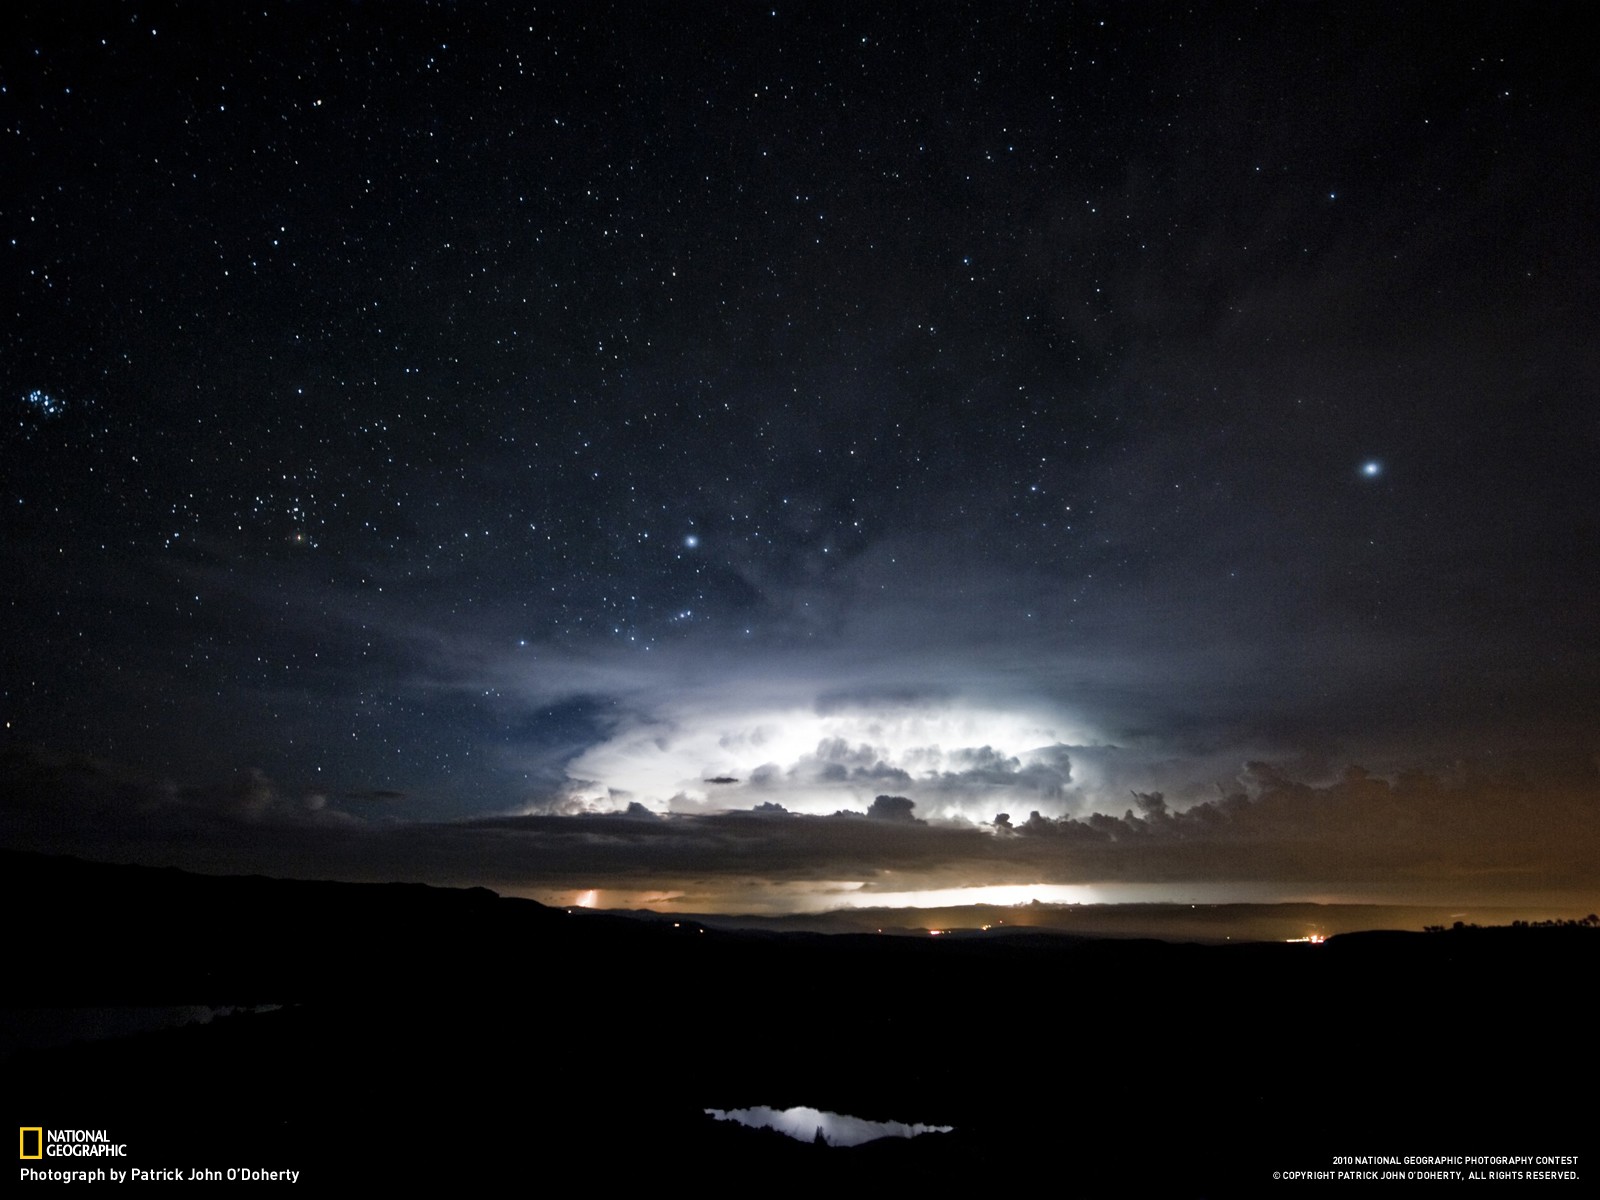 General 1600x1200 sky clouds night stars nature lights outdoors starry night National Geographic 2010 (Year) low light watermarked